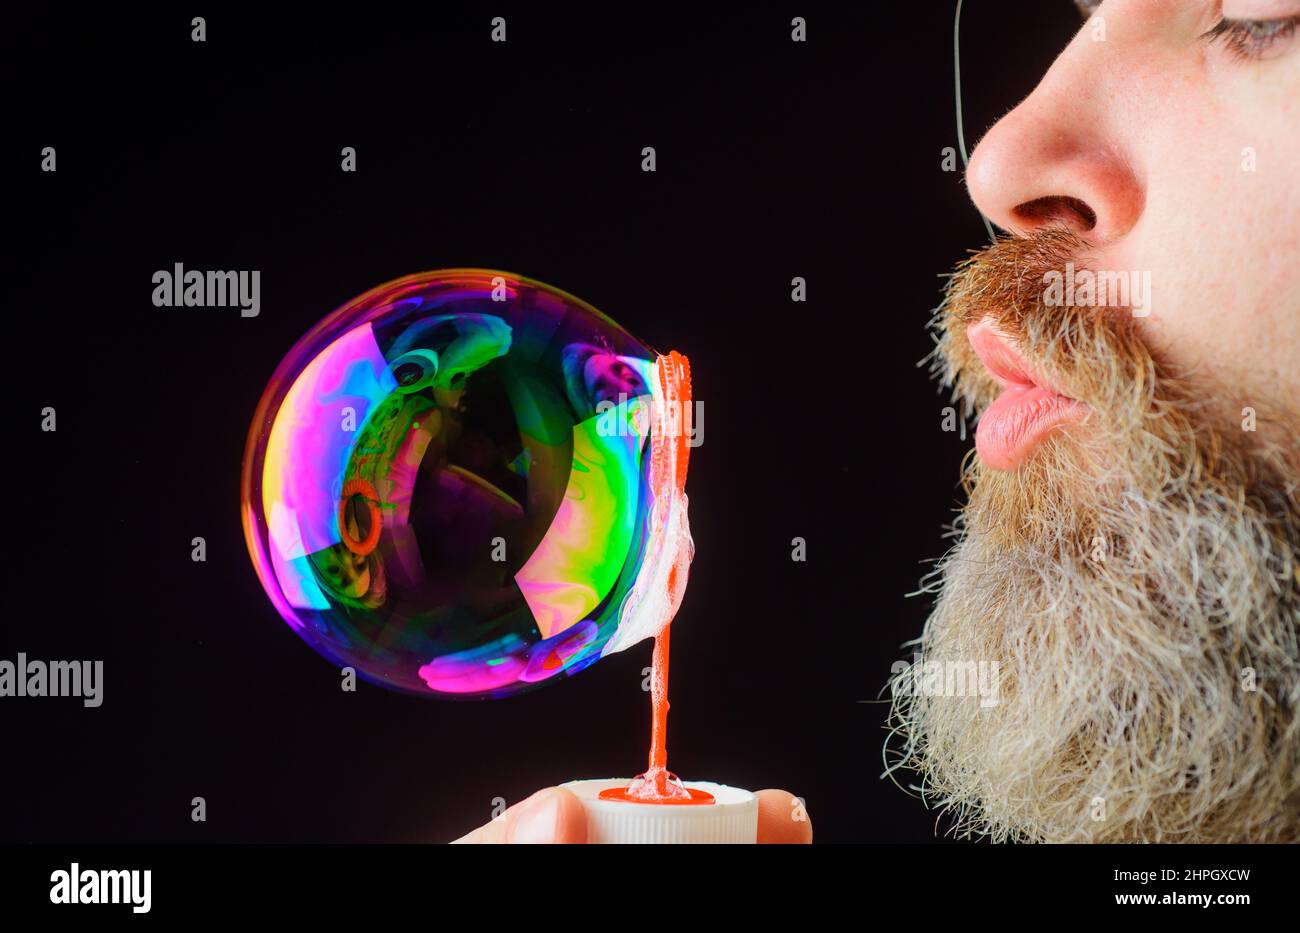 Bearded man blowing soap bubbles. Play with bubbles. Happiness. Good mood. Childhood. Closeup. Stock Photo